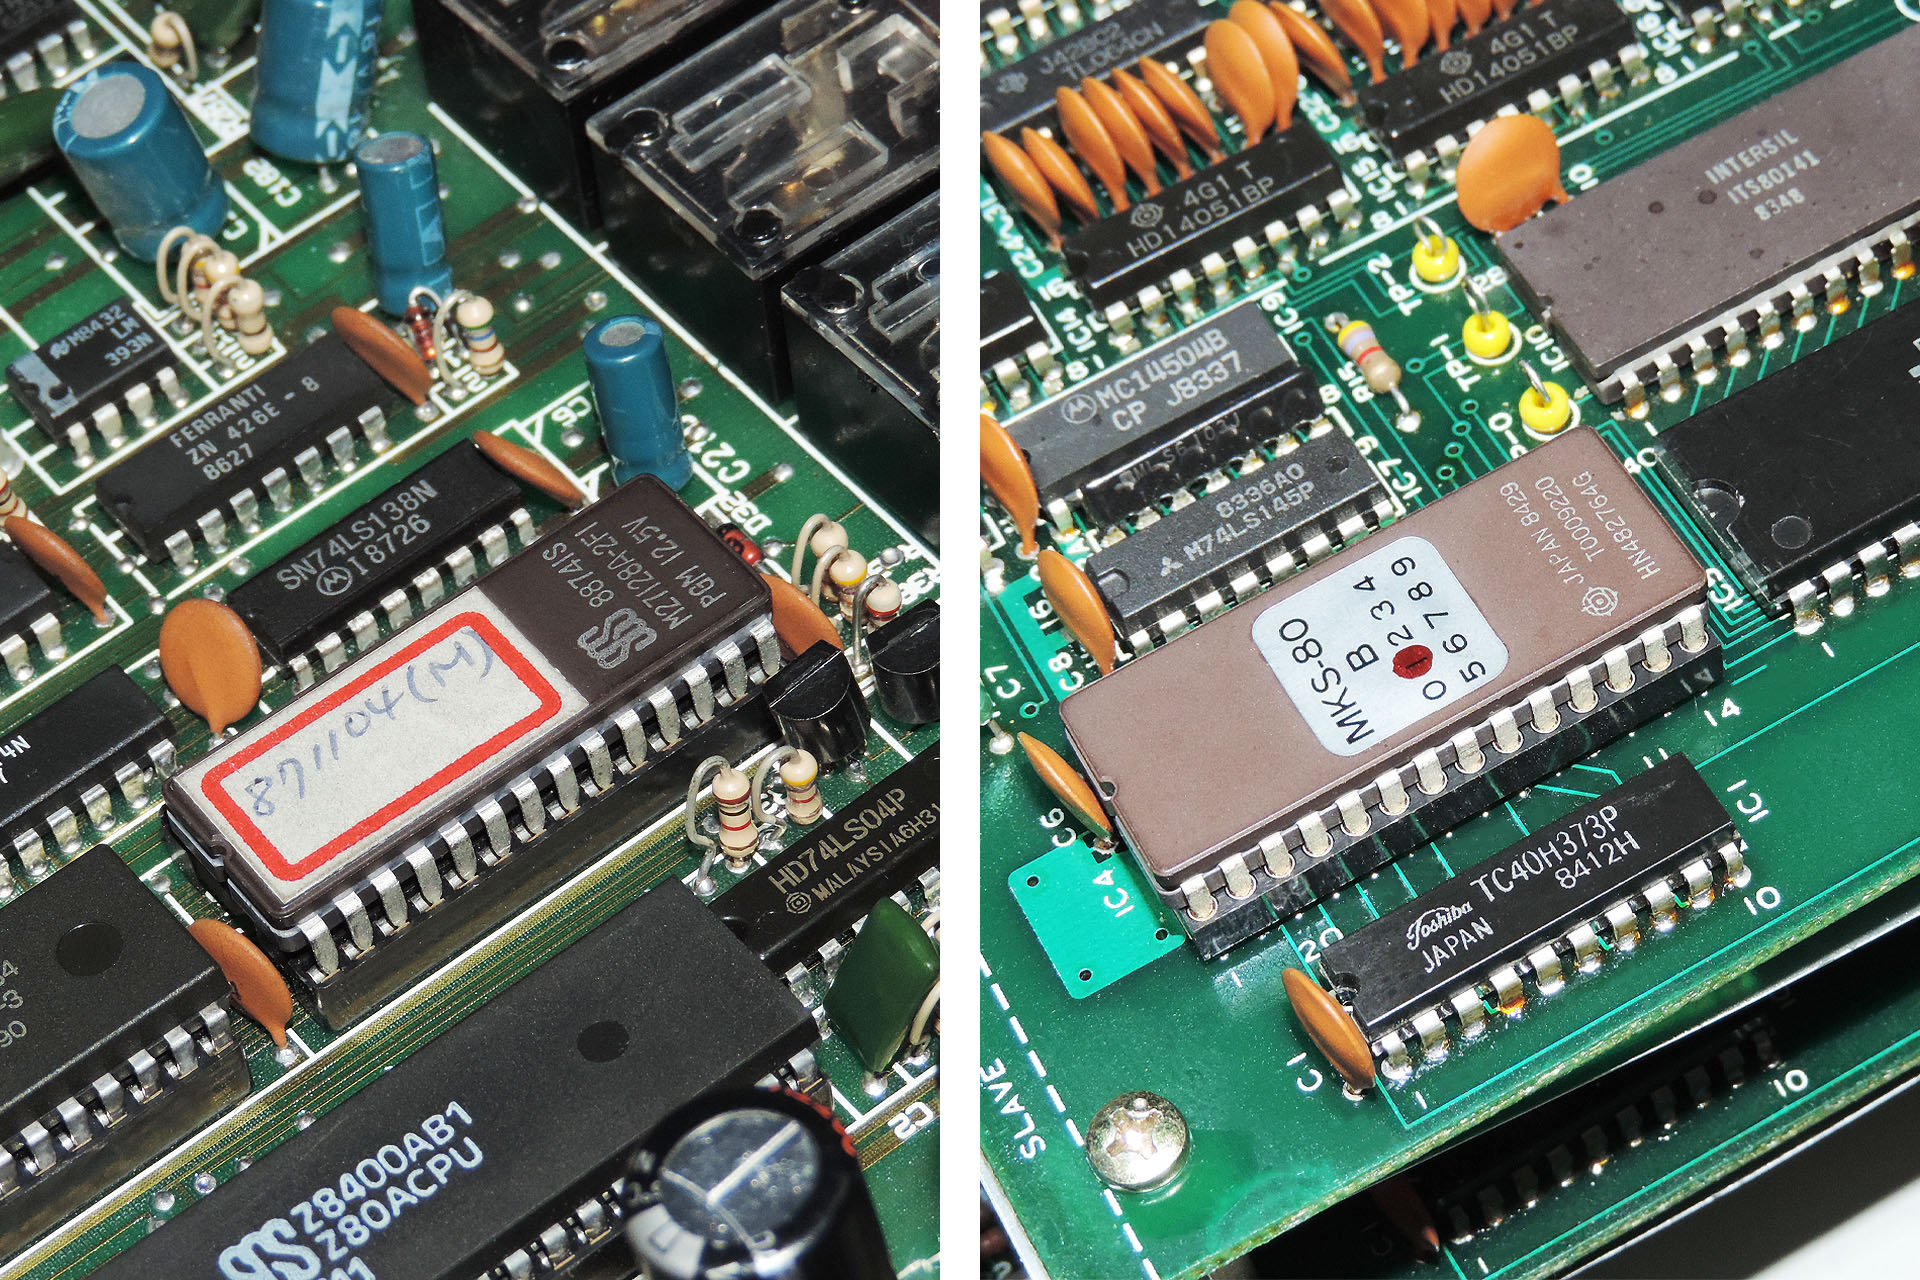 Firmware EPROMs in Sound Lab SST-19 (left) and on Roland MKS-80 voice-board (right)